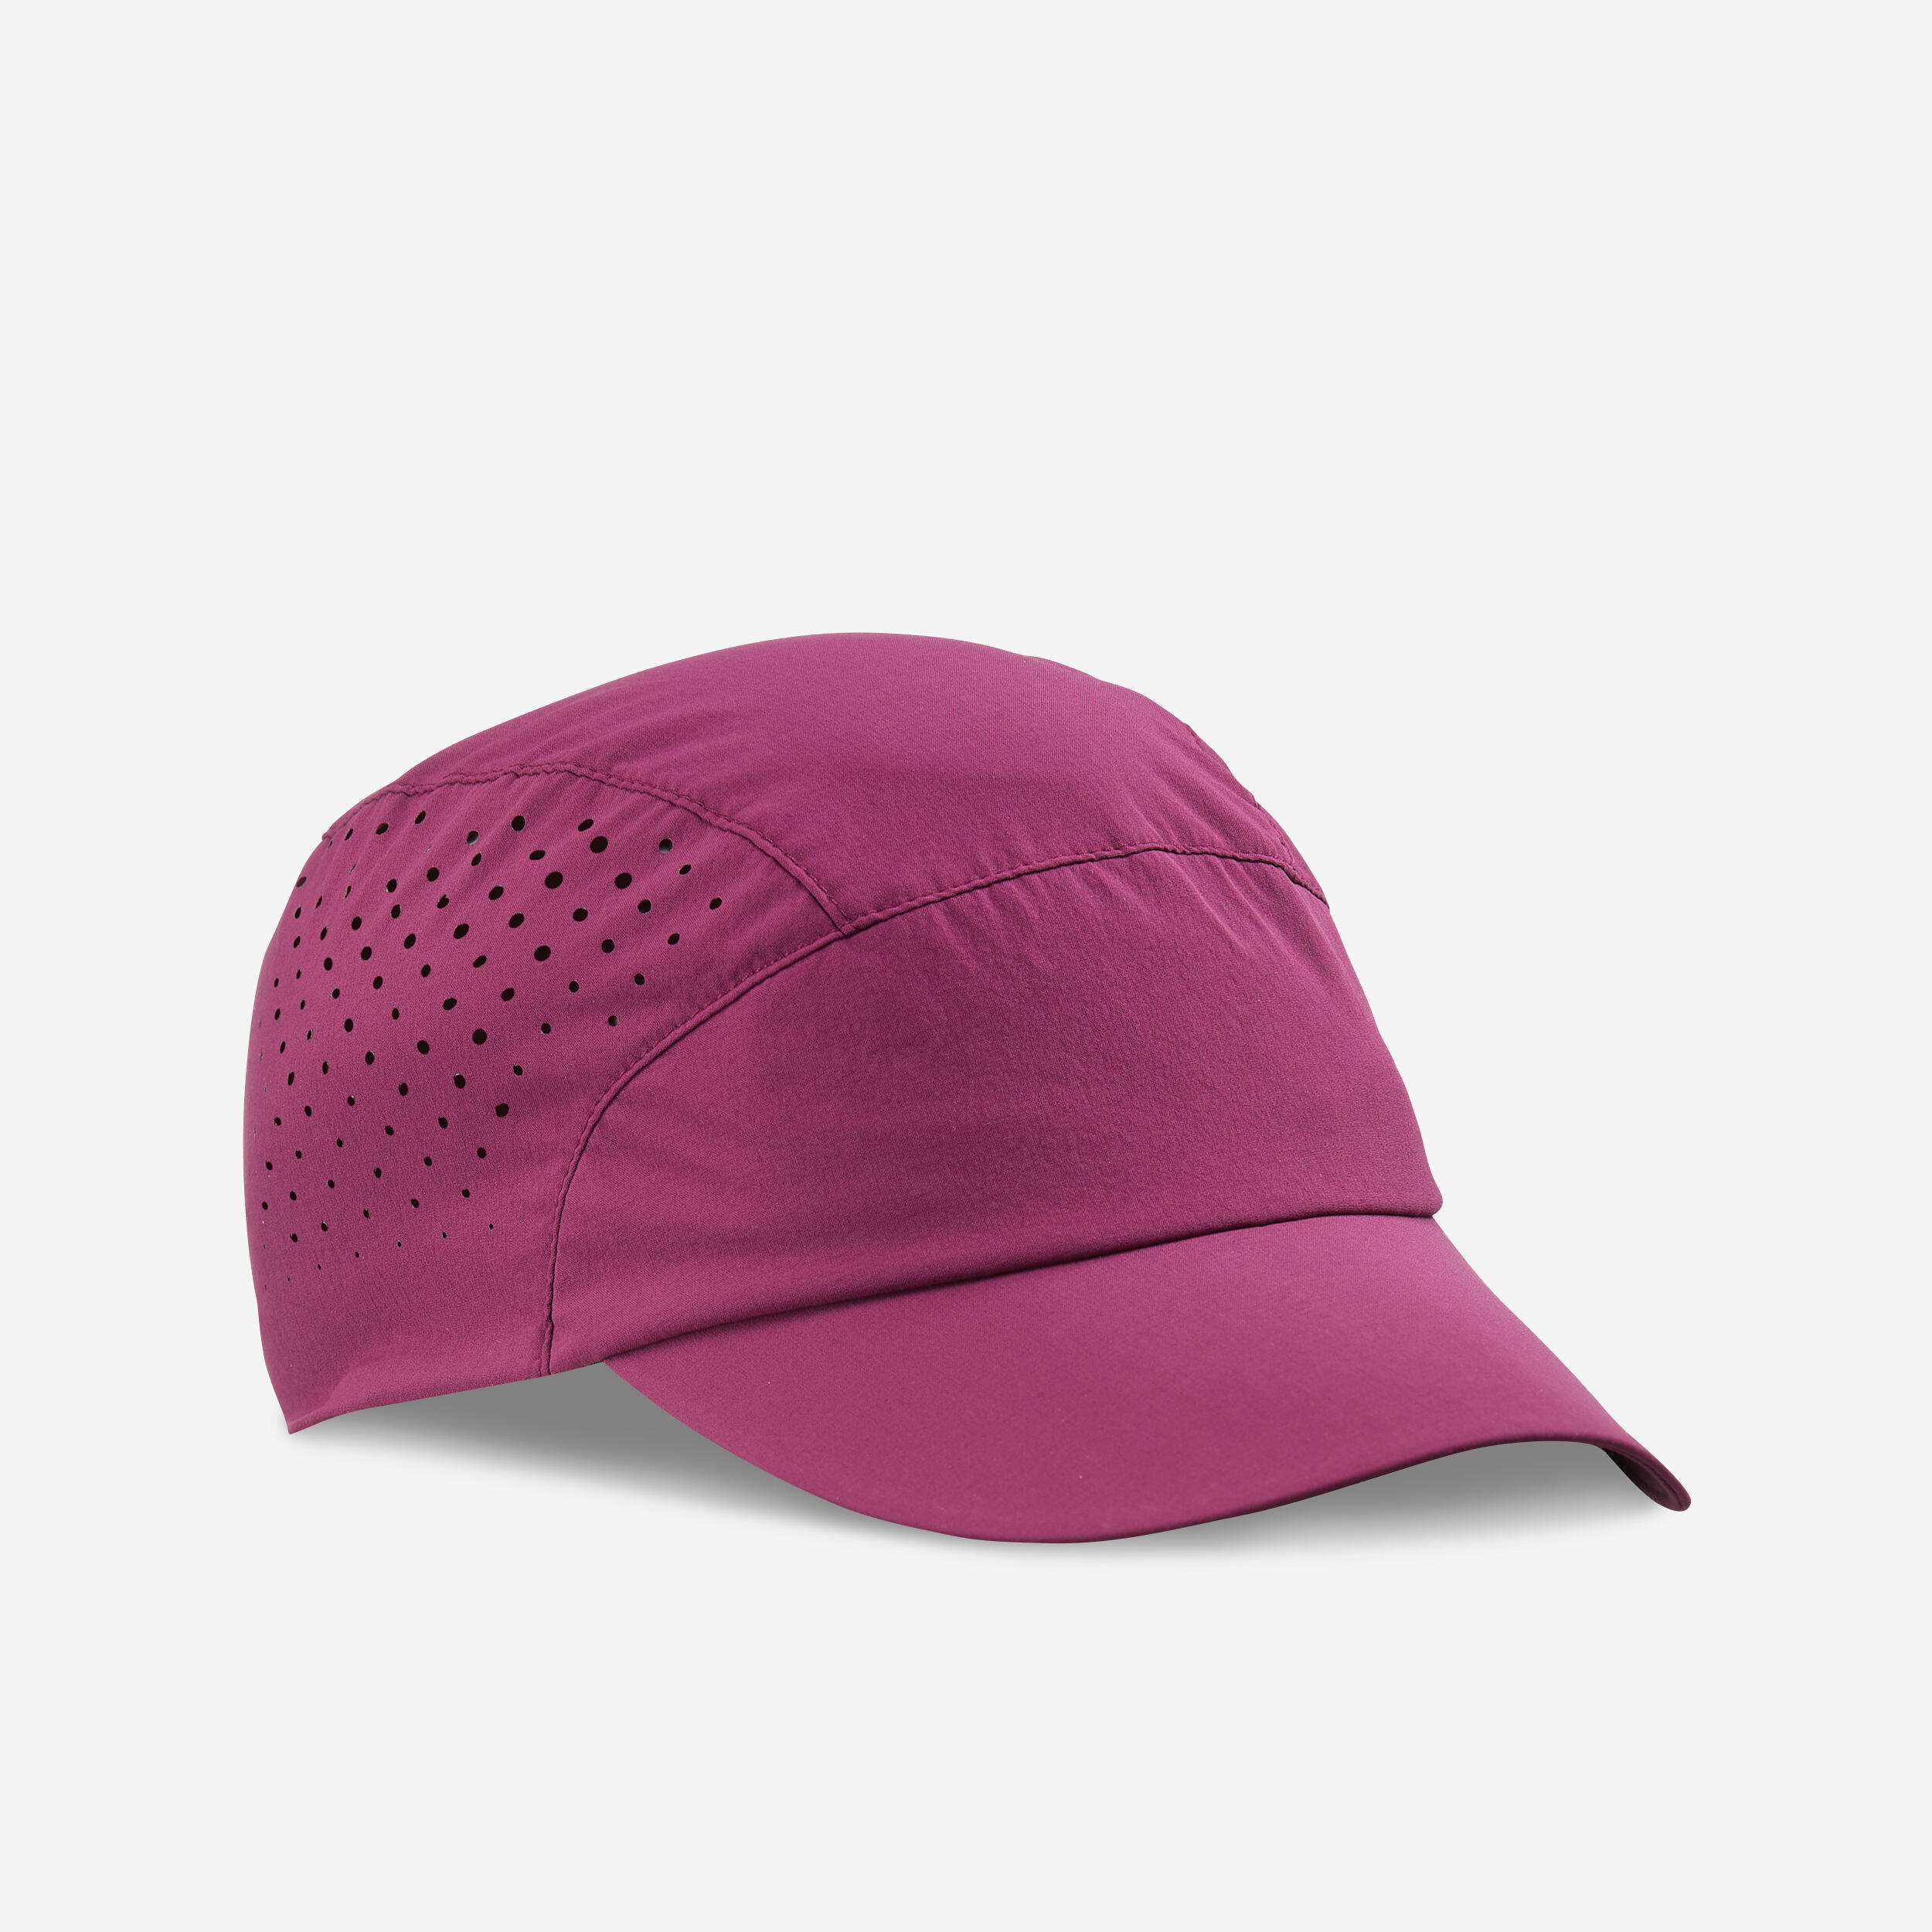 FORCLAZ Ventilated and Ultra Compact Cap - Purple